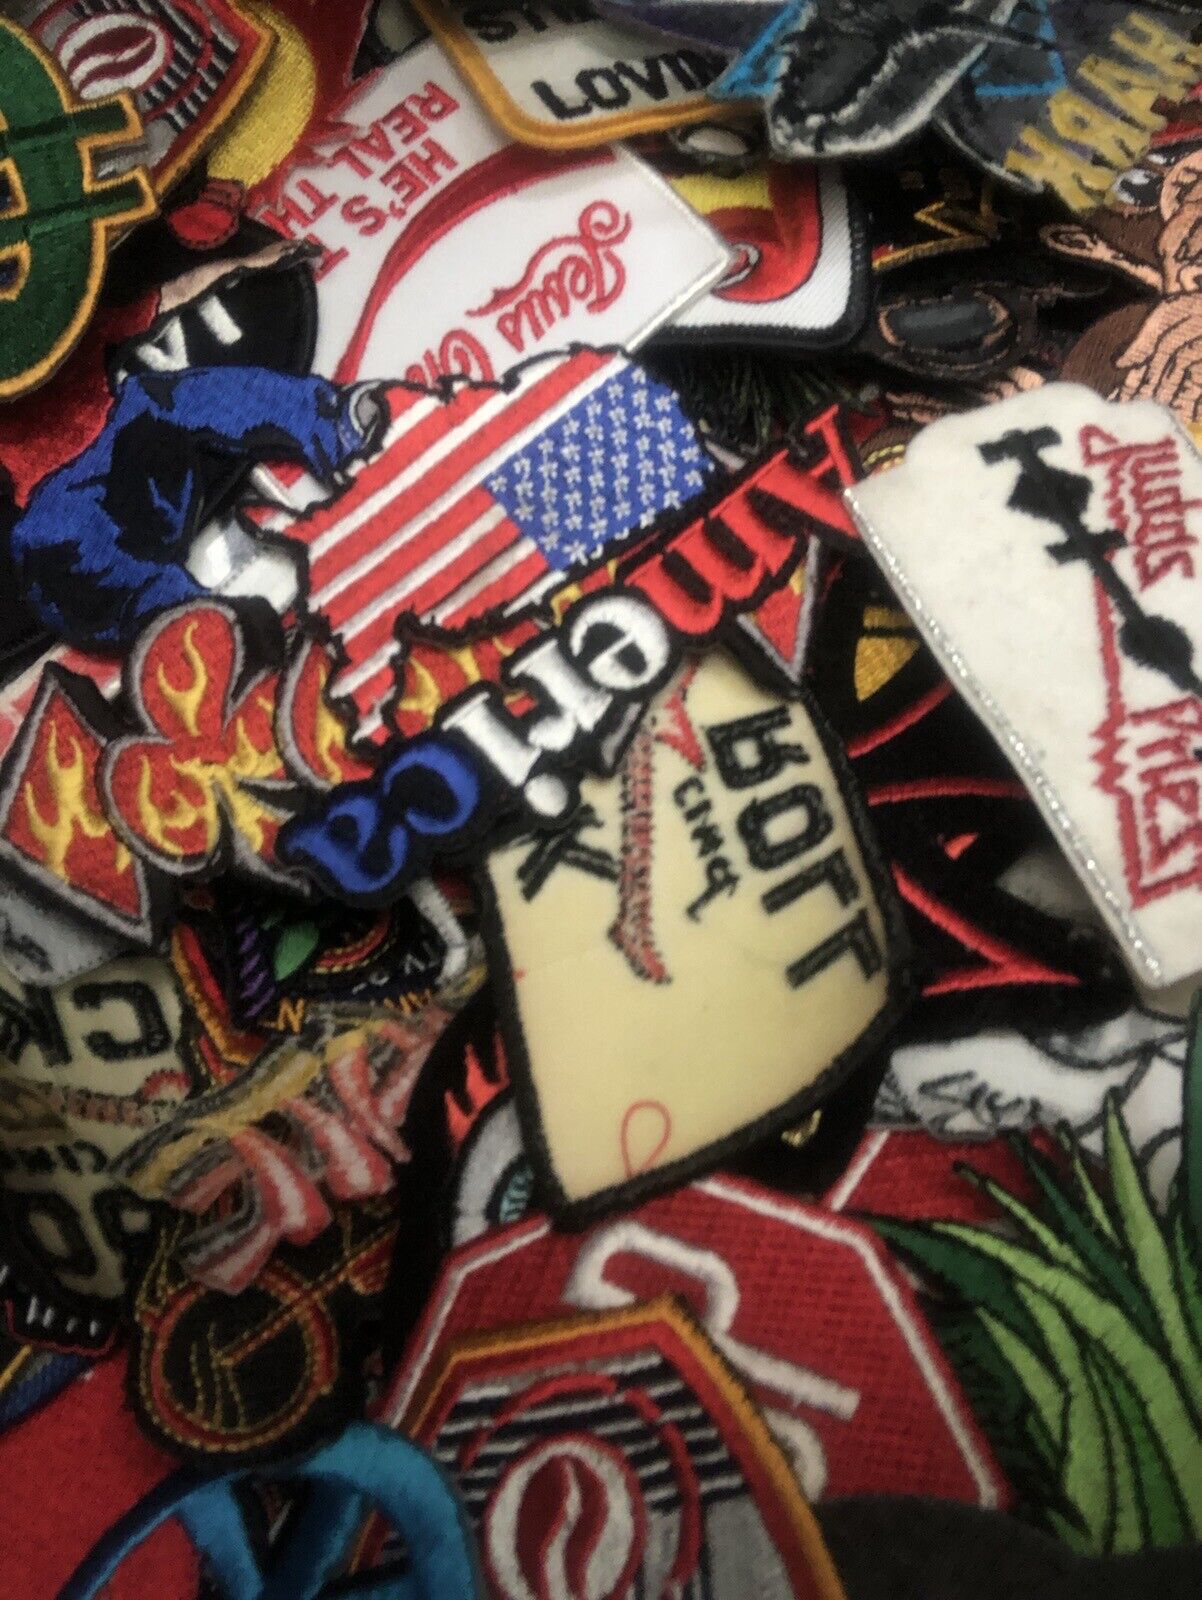 Company Advertising Vintage 1970-80's Patches Wholesale Lot of 32  Lot # 1